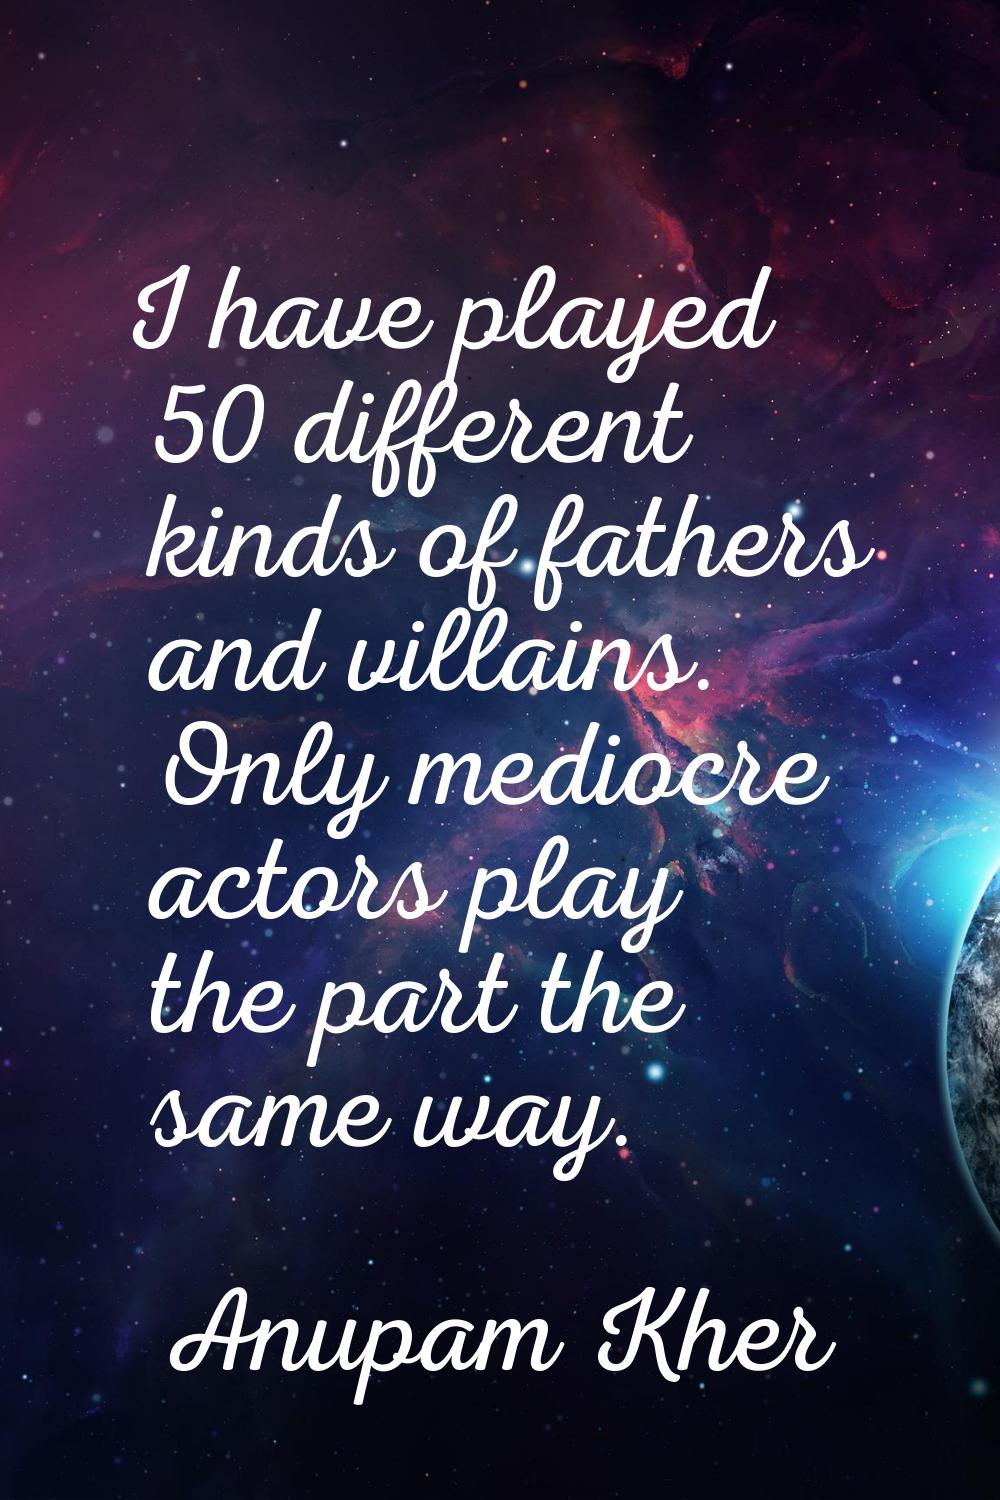 I have played 50 different kinds of fathers and villains. Only mediocre actors play the part the sa